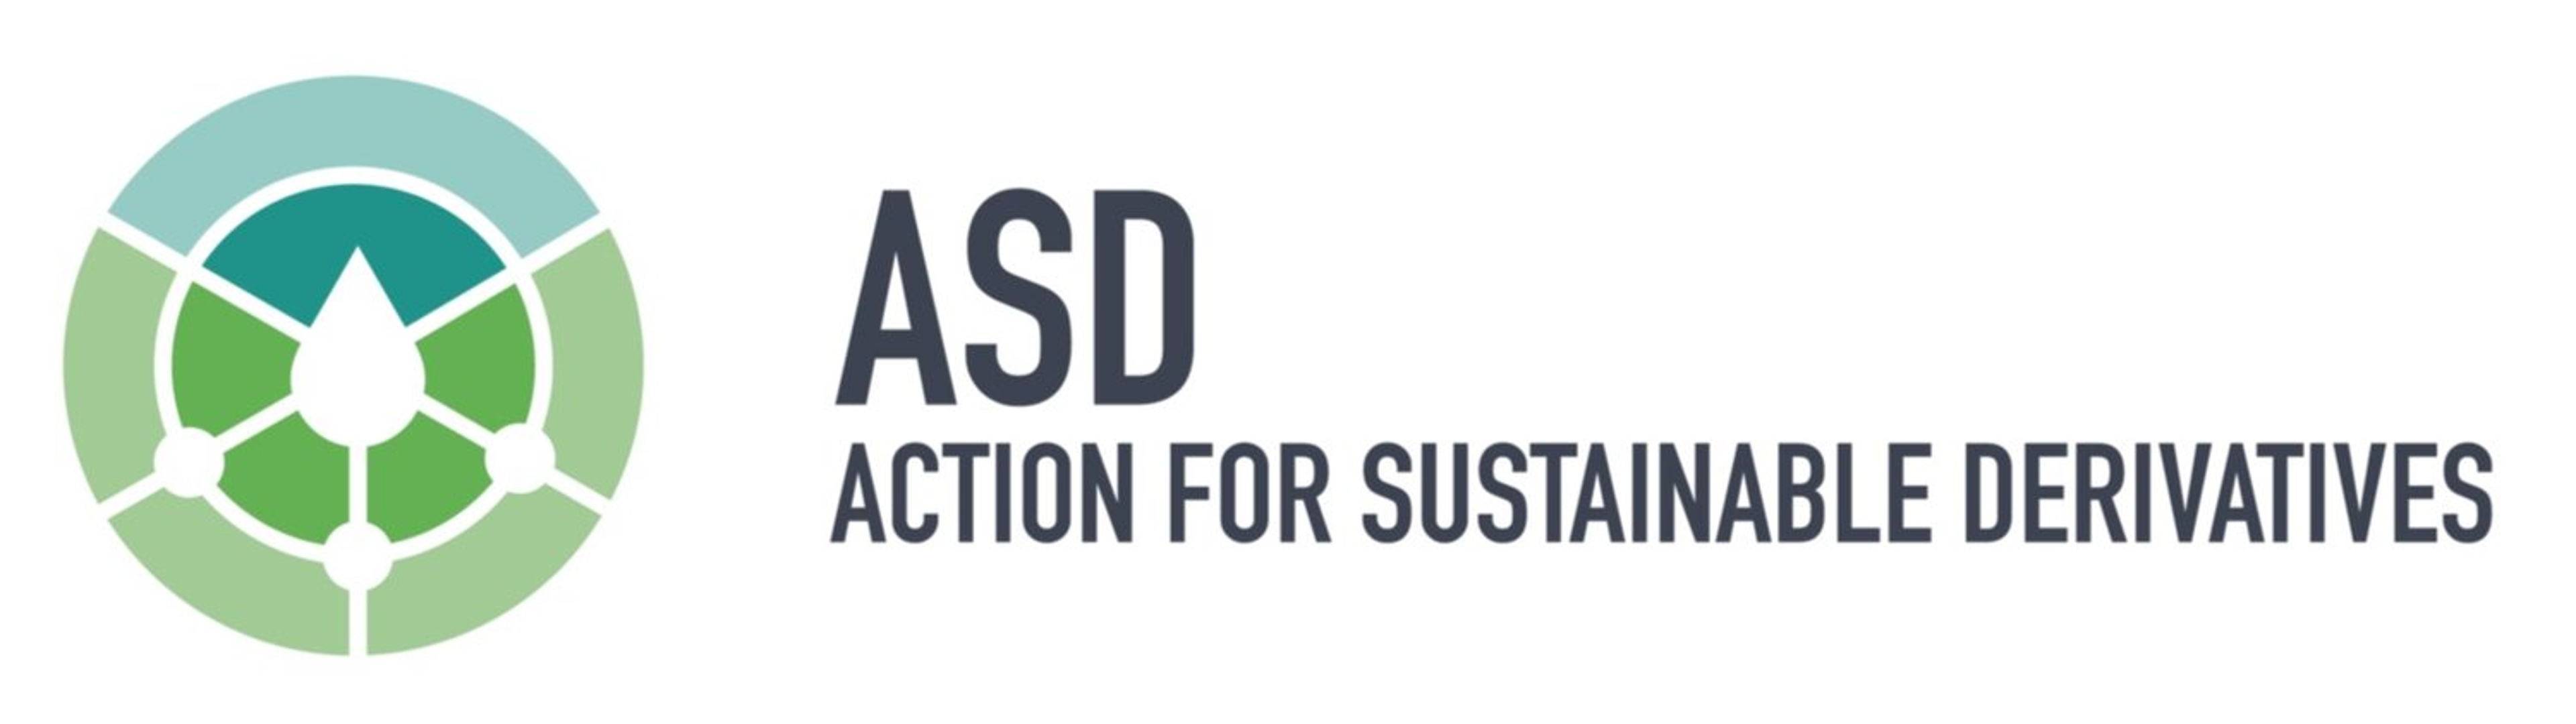 Action for Sustainable Derivatives (ASD)